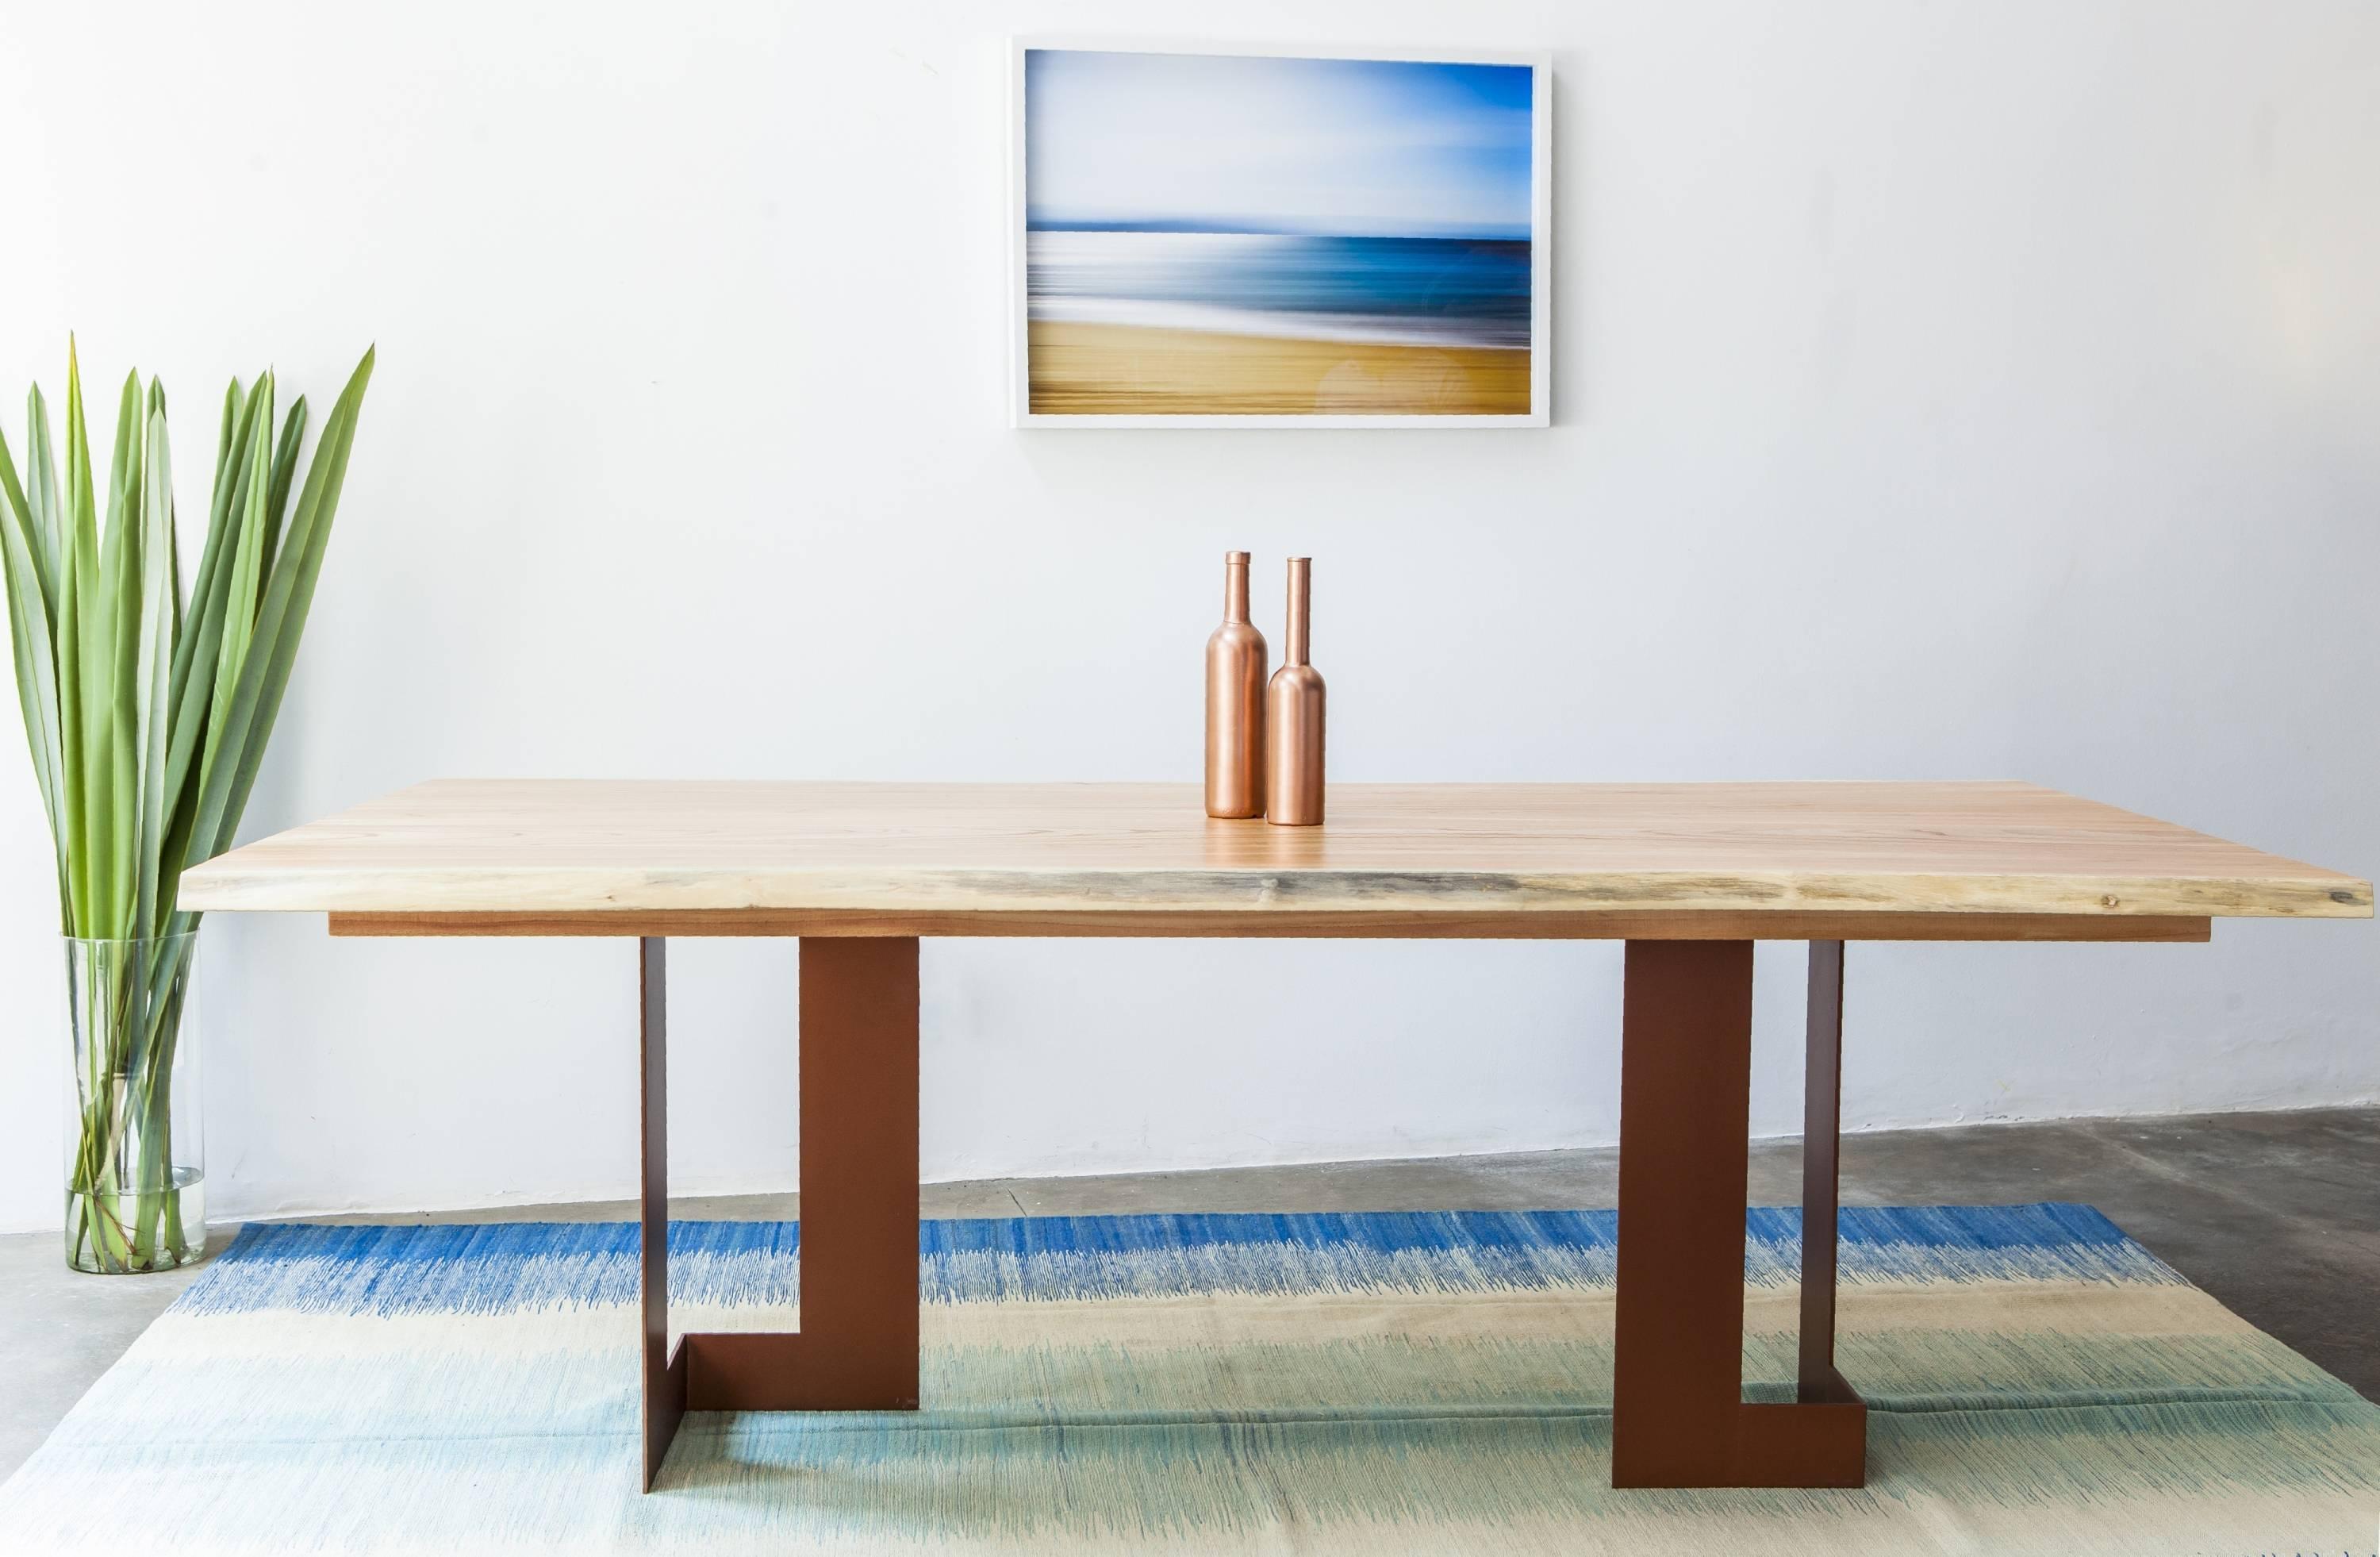 This dining table, made of solid wood in a minimalist style, was Inspired by modernist architectural projects and the grace of its structures, which Alessandra Delgado used to design the dining table 'Planos'. Its base is made of cropped steel